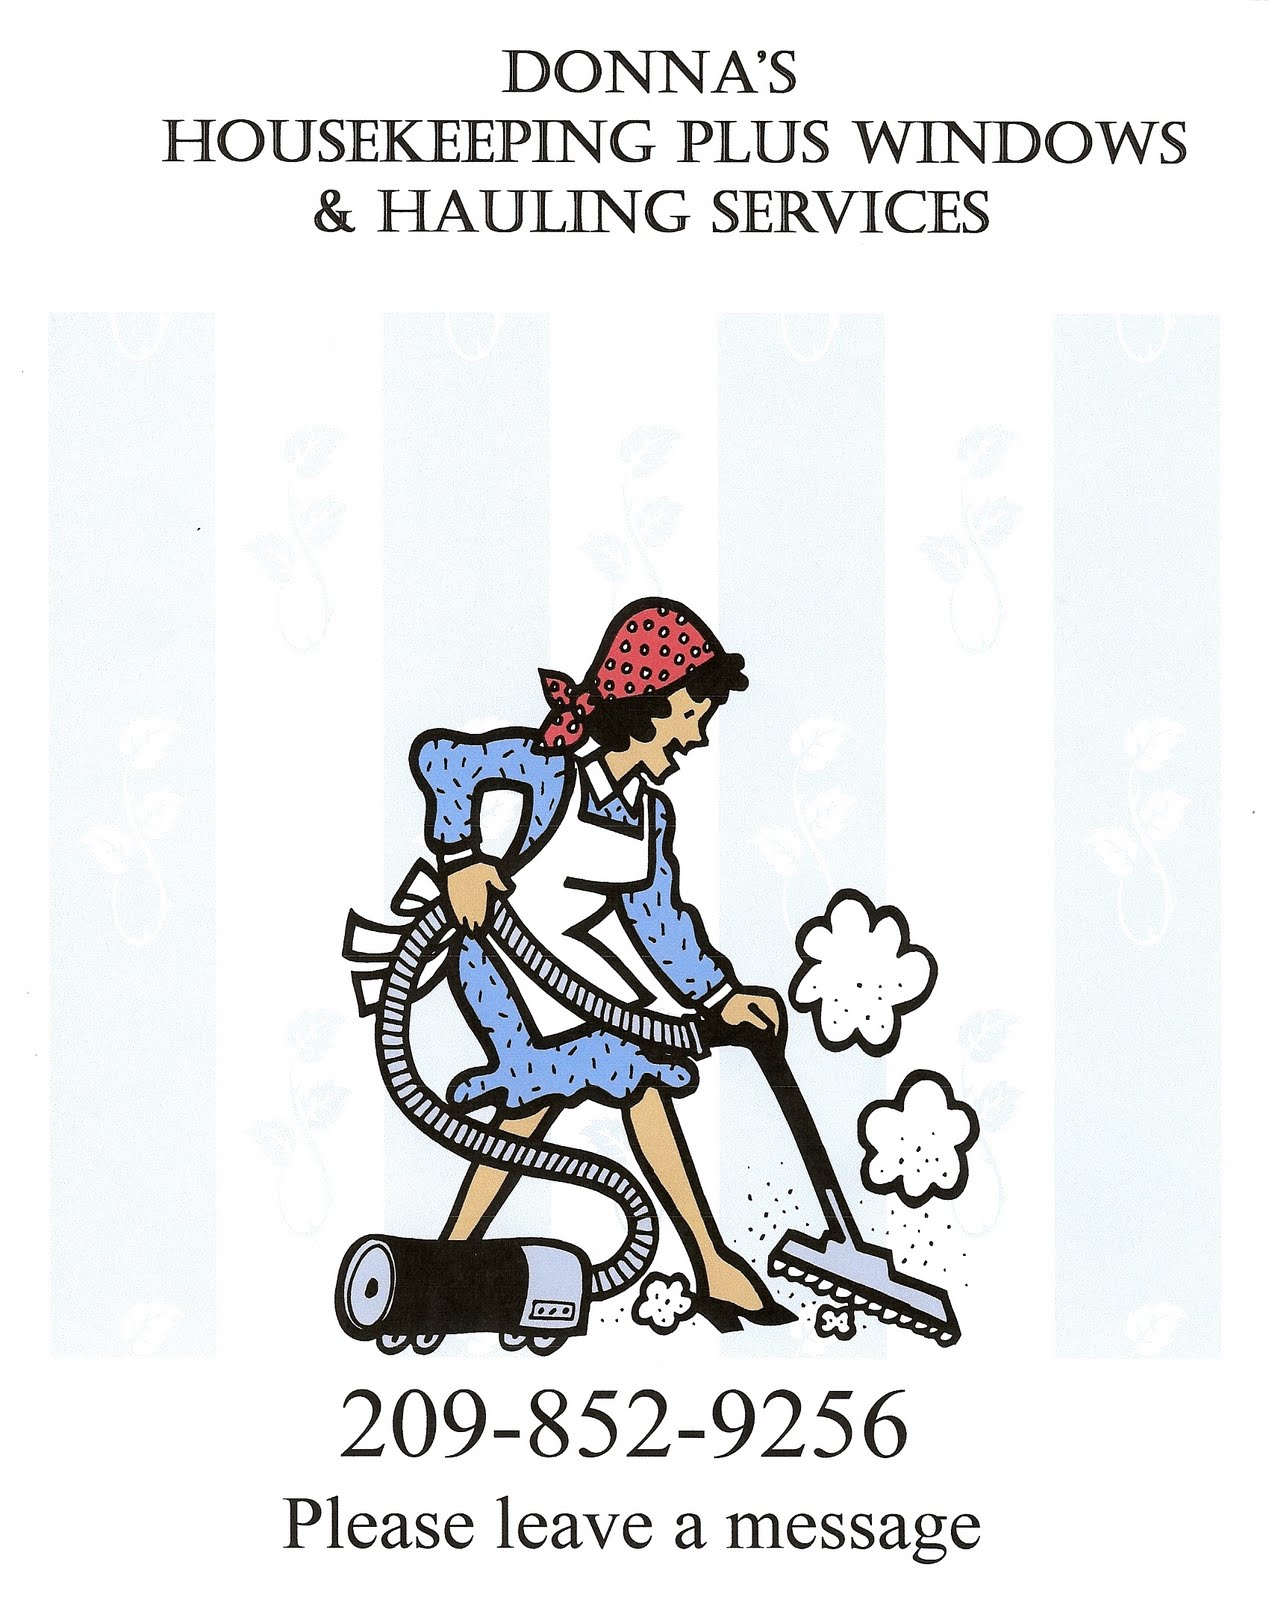 Donna's Housekeeping Plus Windows & Hauling Services